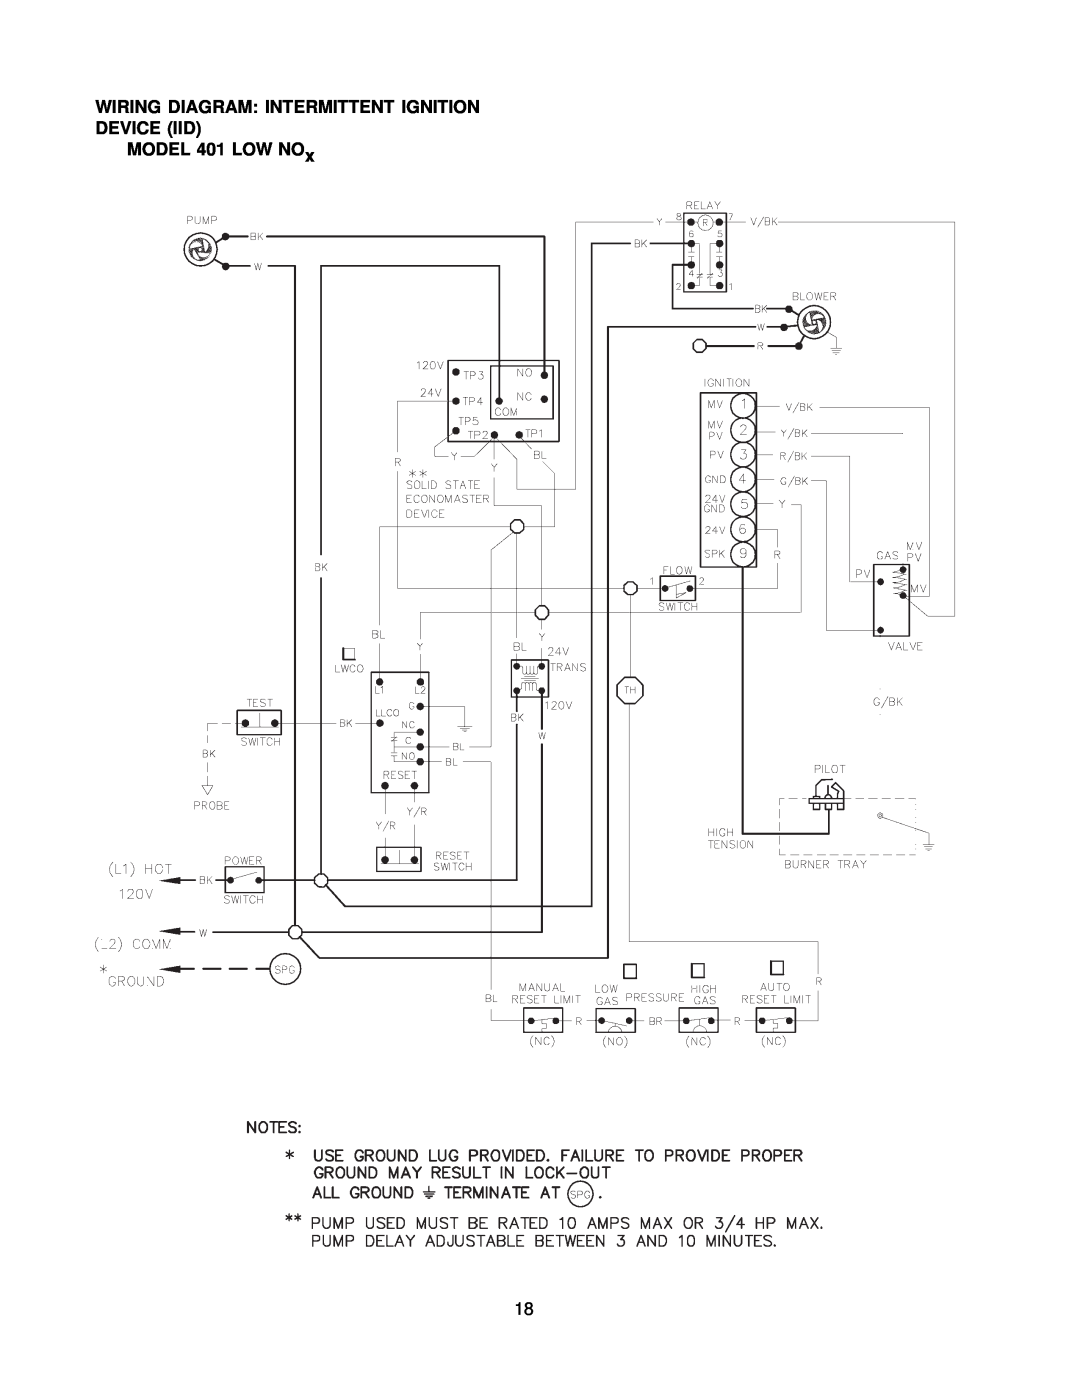 Raypak 260-401 manual Wiring Diagram Intermittent Ignition Device Iid, MODEL 401 LOW NOx 